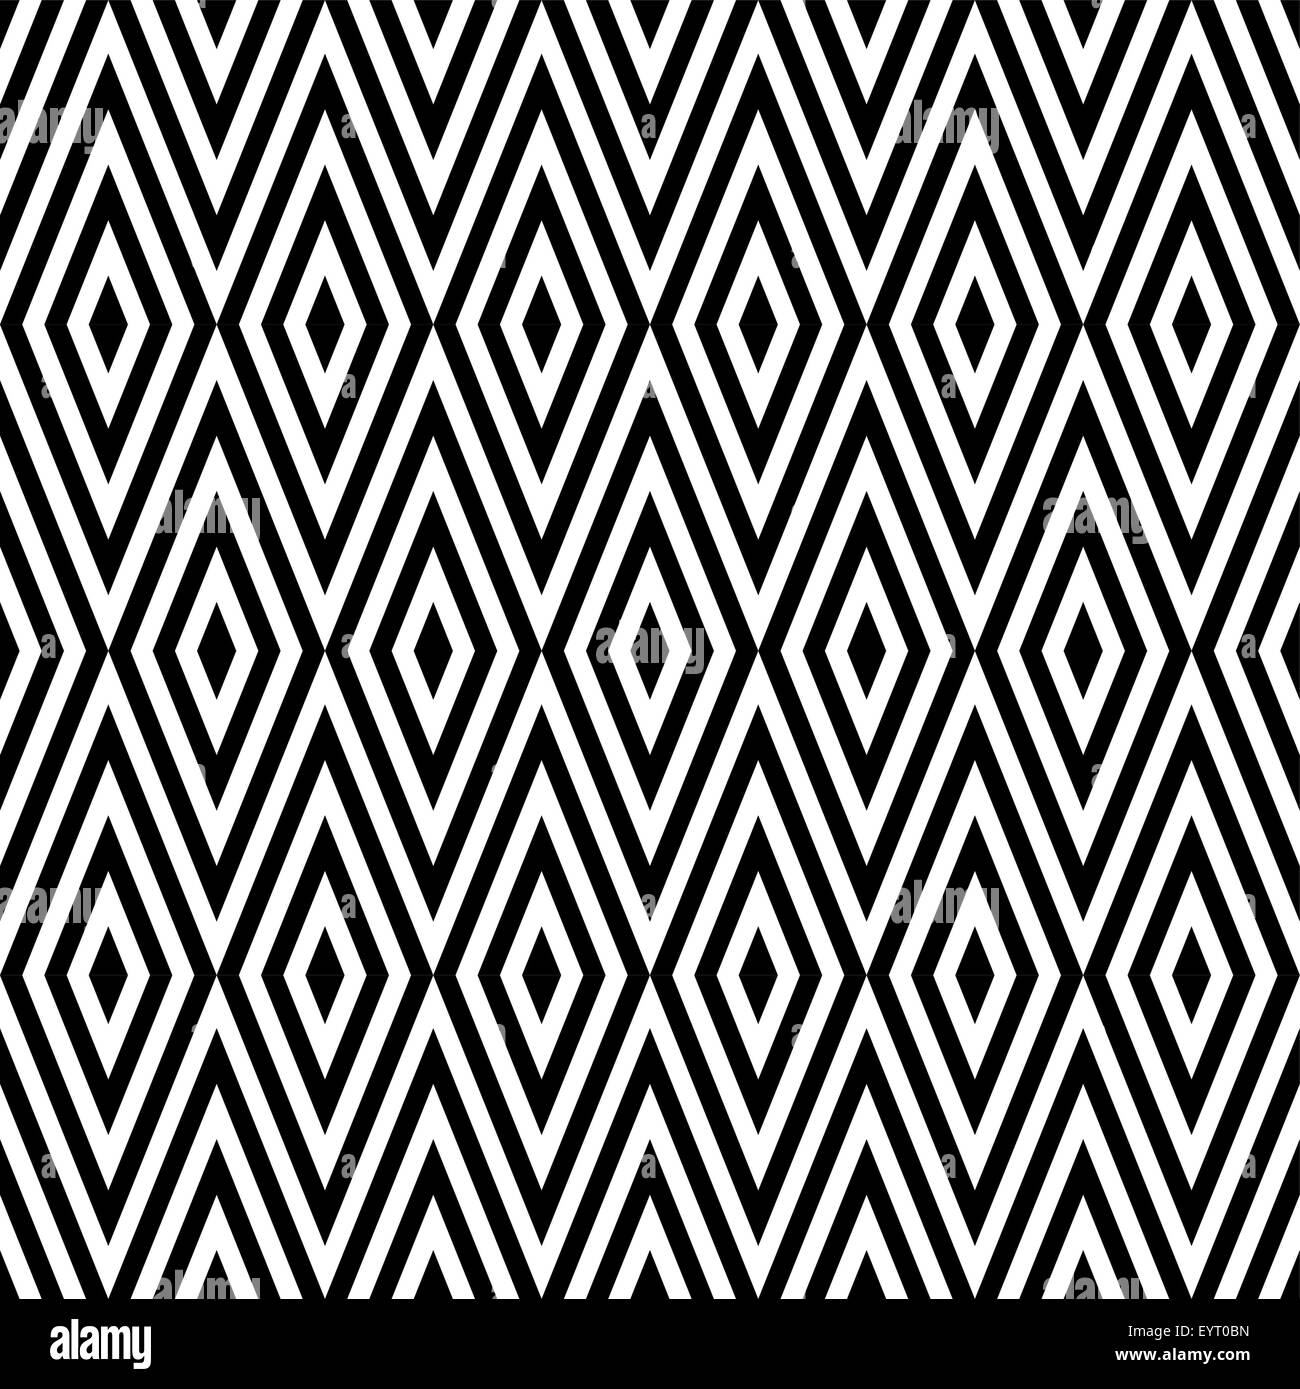 Geometric black and white abstract zigzag vintage retro seamless pattern background. Ideal for fabric, wrapping paper and print Stock Vector